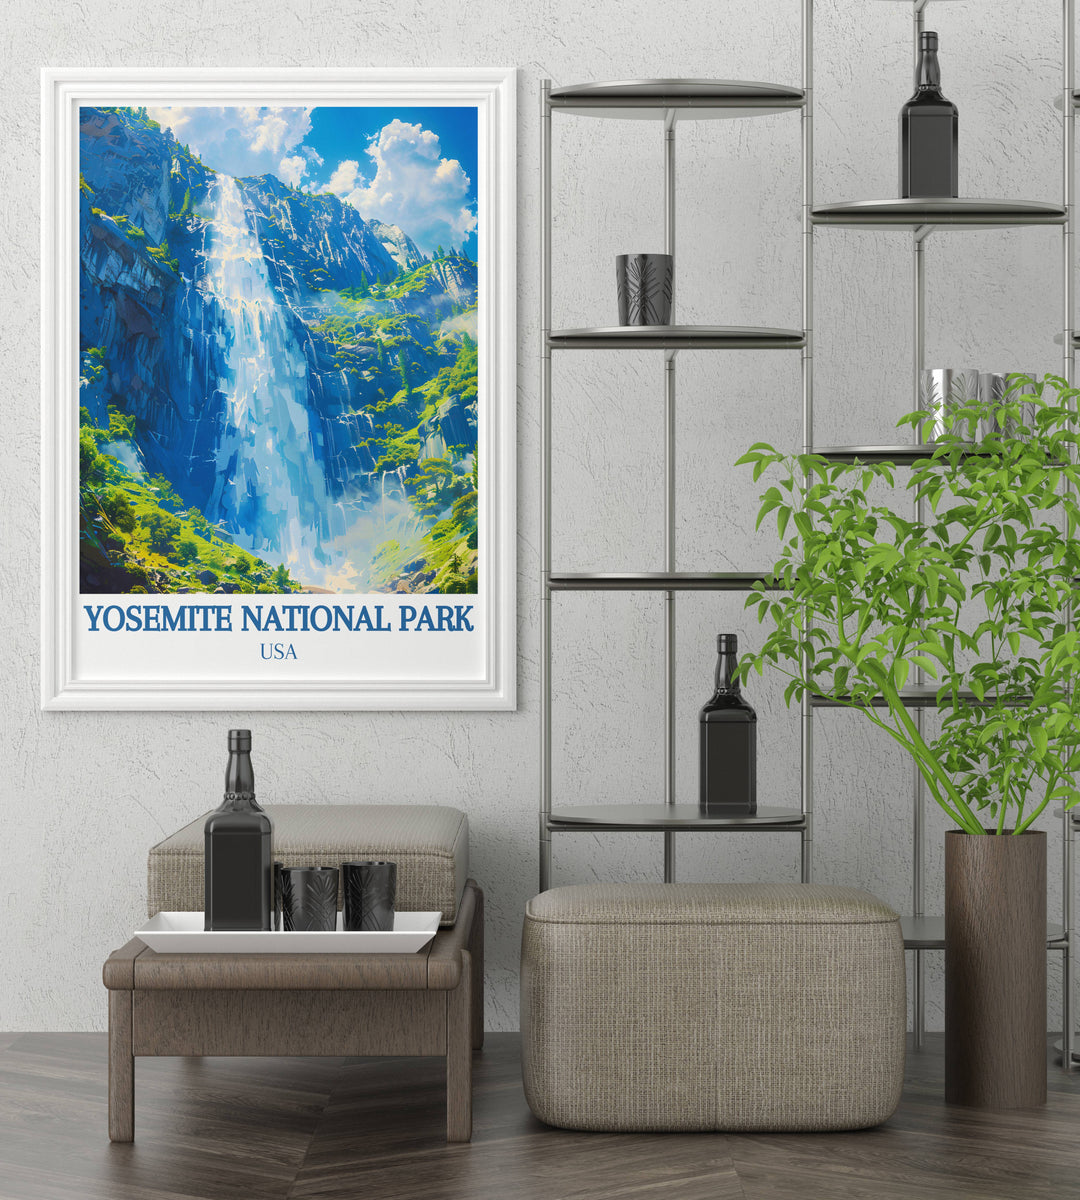 Exquisite Yosemite National Park wall art capturing the essence of this iconic destination, from Yosemite Valleys tranquil beauty to the majestic heights of Bridalveil Fall.